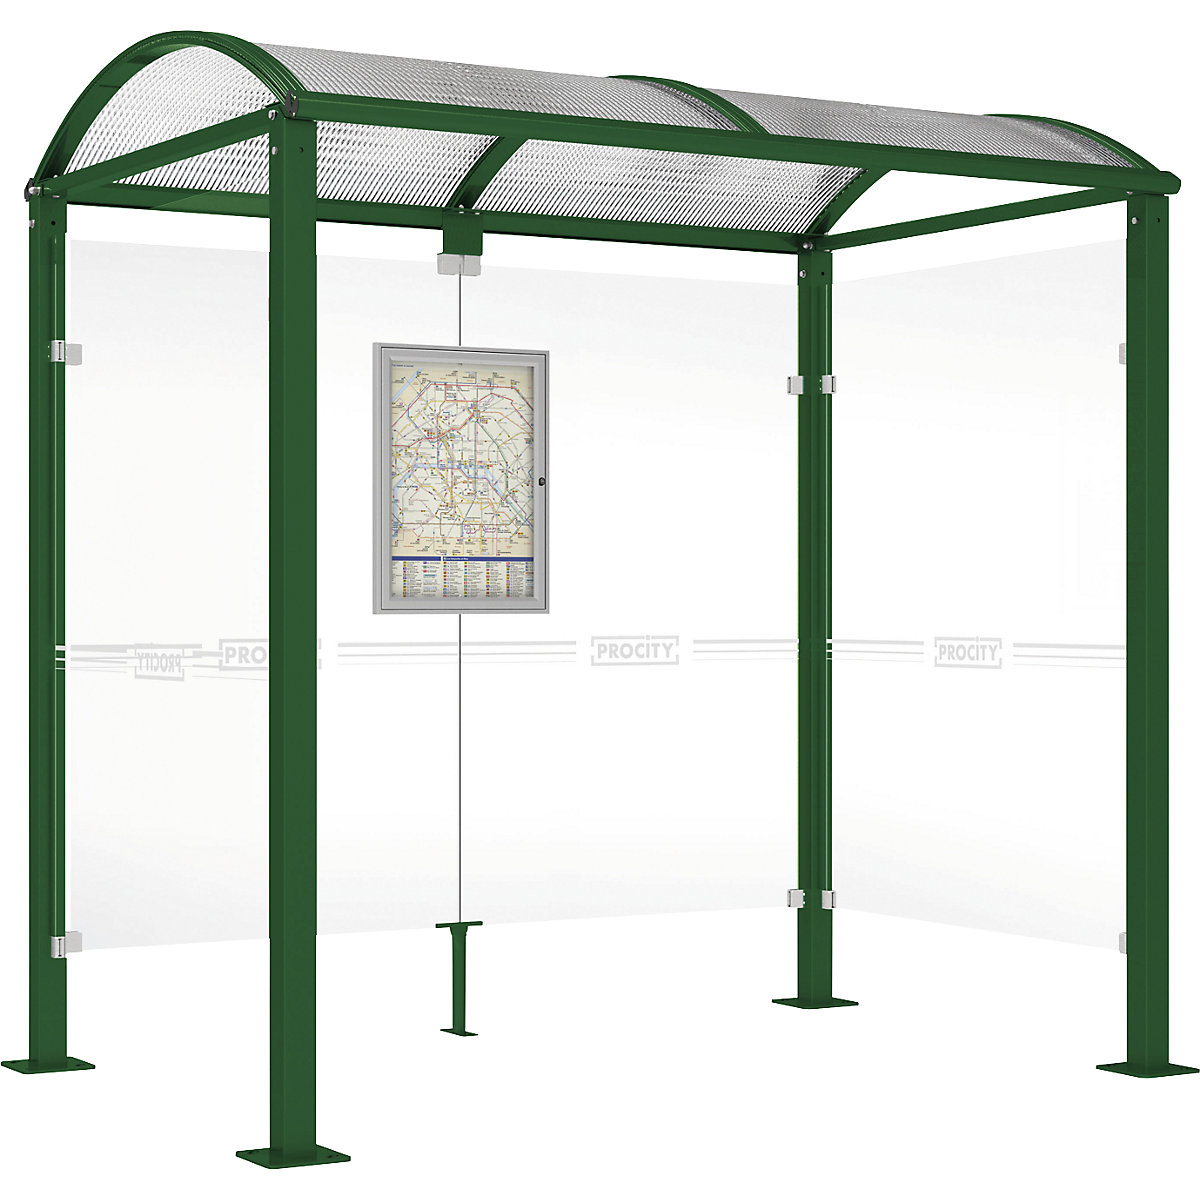 Waiting shelter – PROCITY, with 2 side panels, width 2520 mm, moss green-4